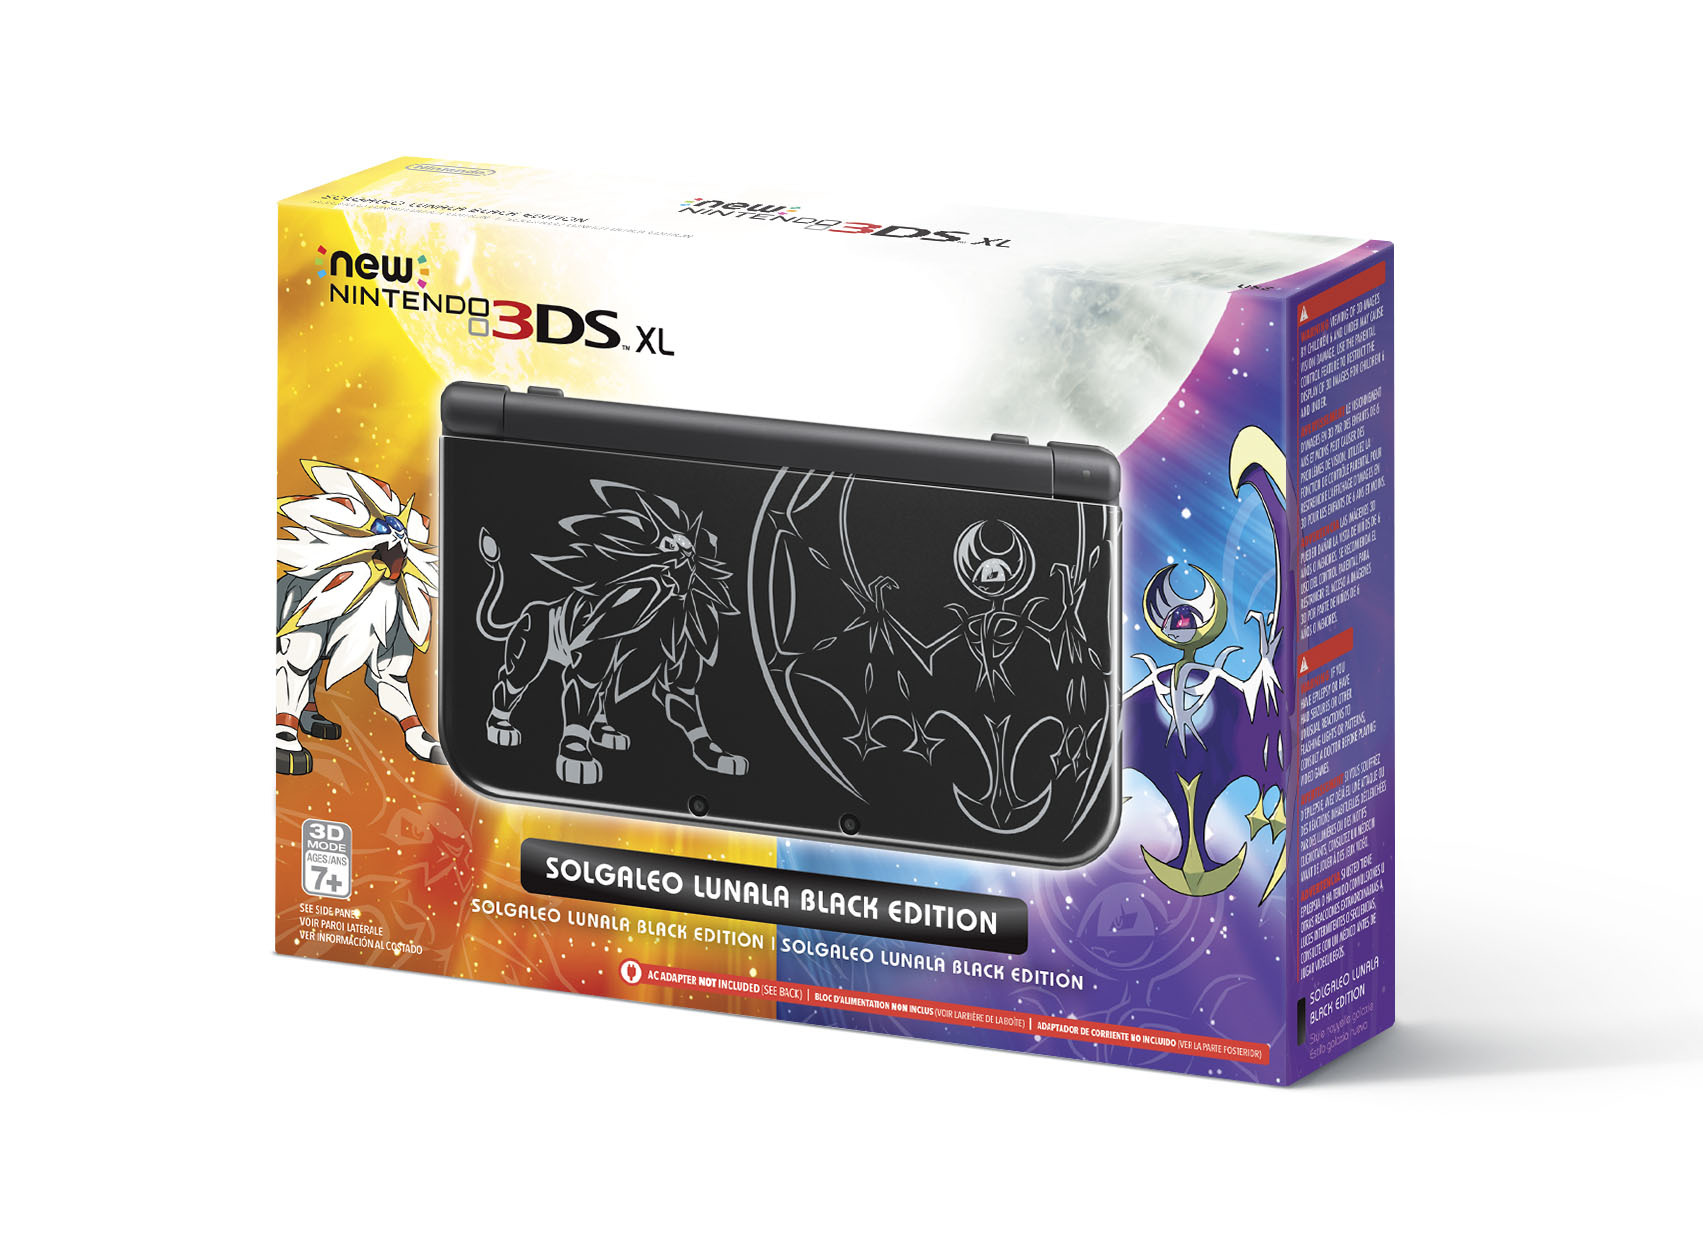 Muldyr Render Brug for New Nintendo 3DS XL System Inspired by Upcoming Pokémon Games Arrives in  Stores Oct. 28 | Business Wire